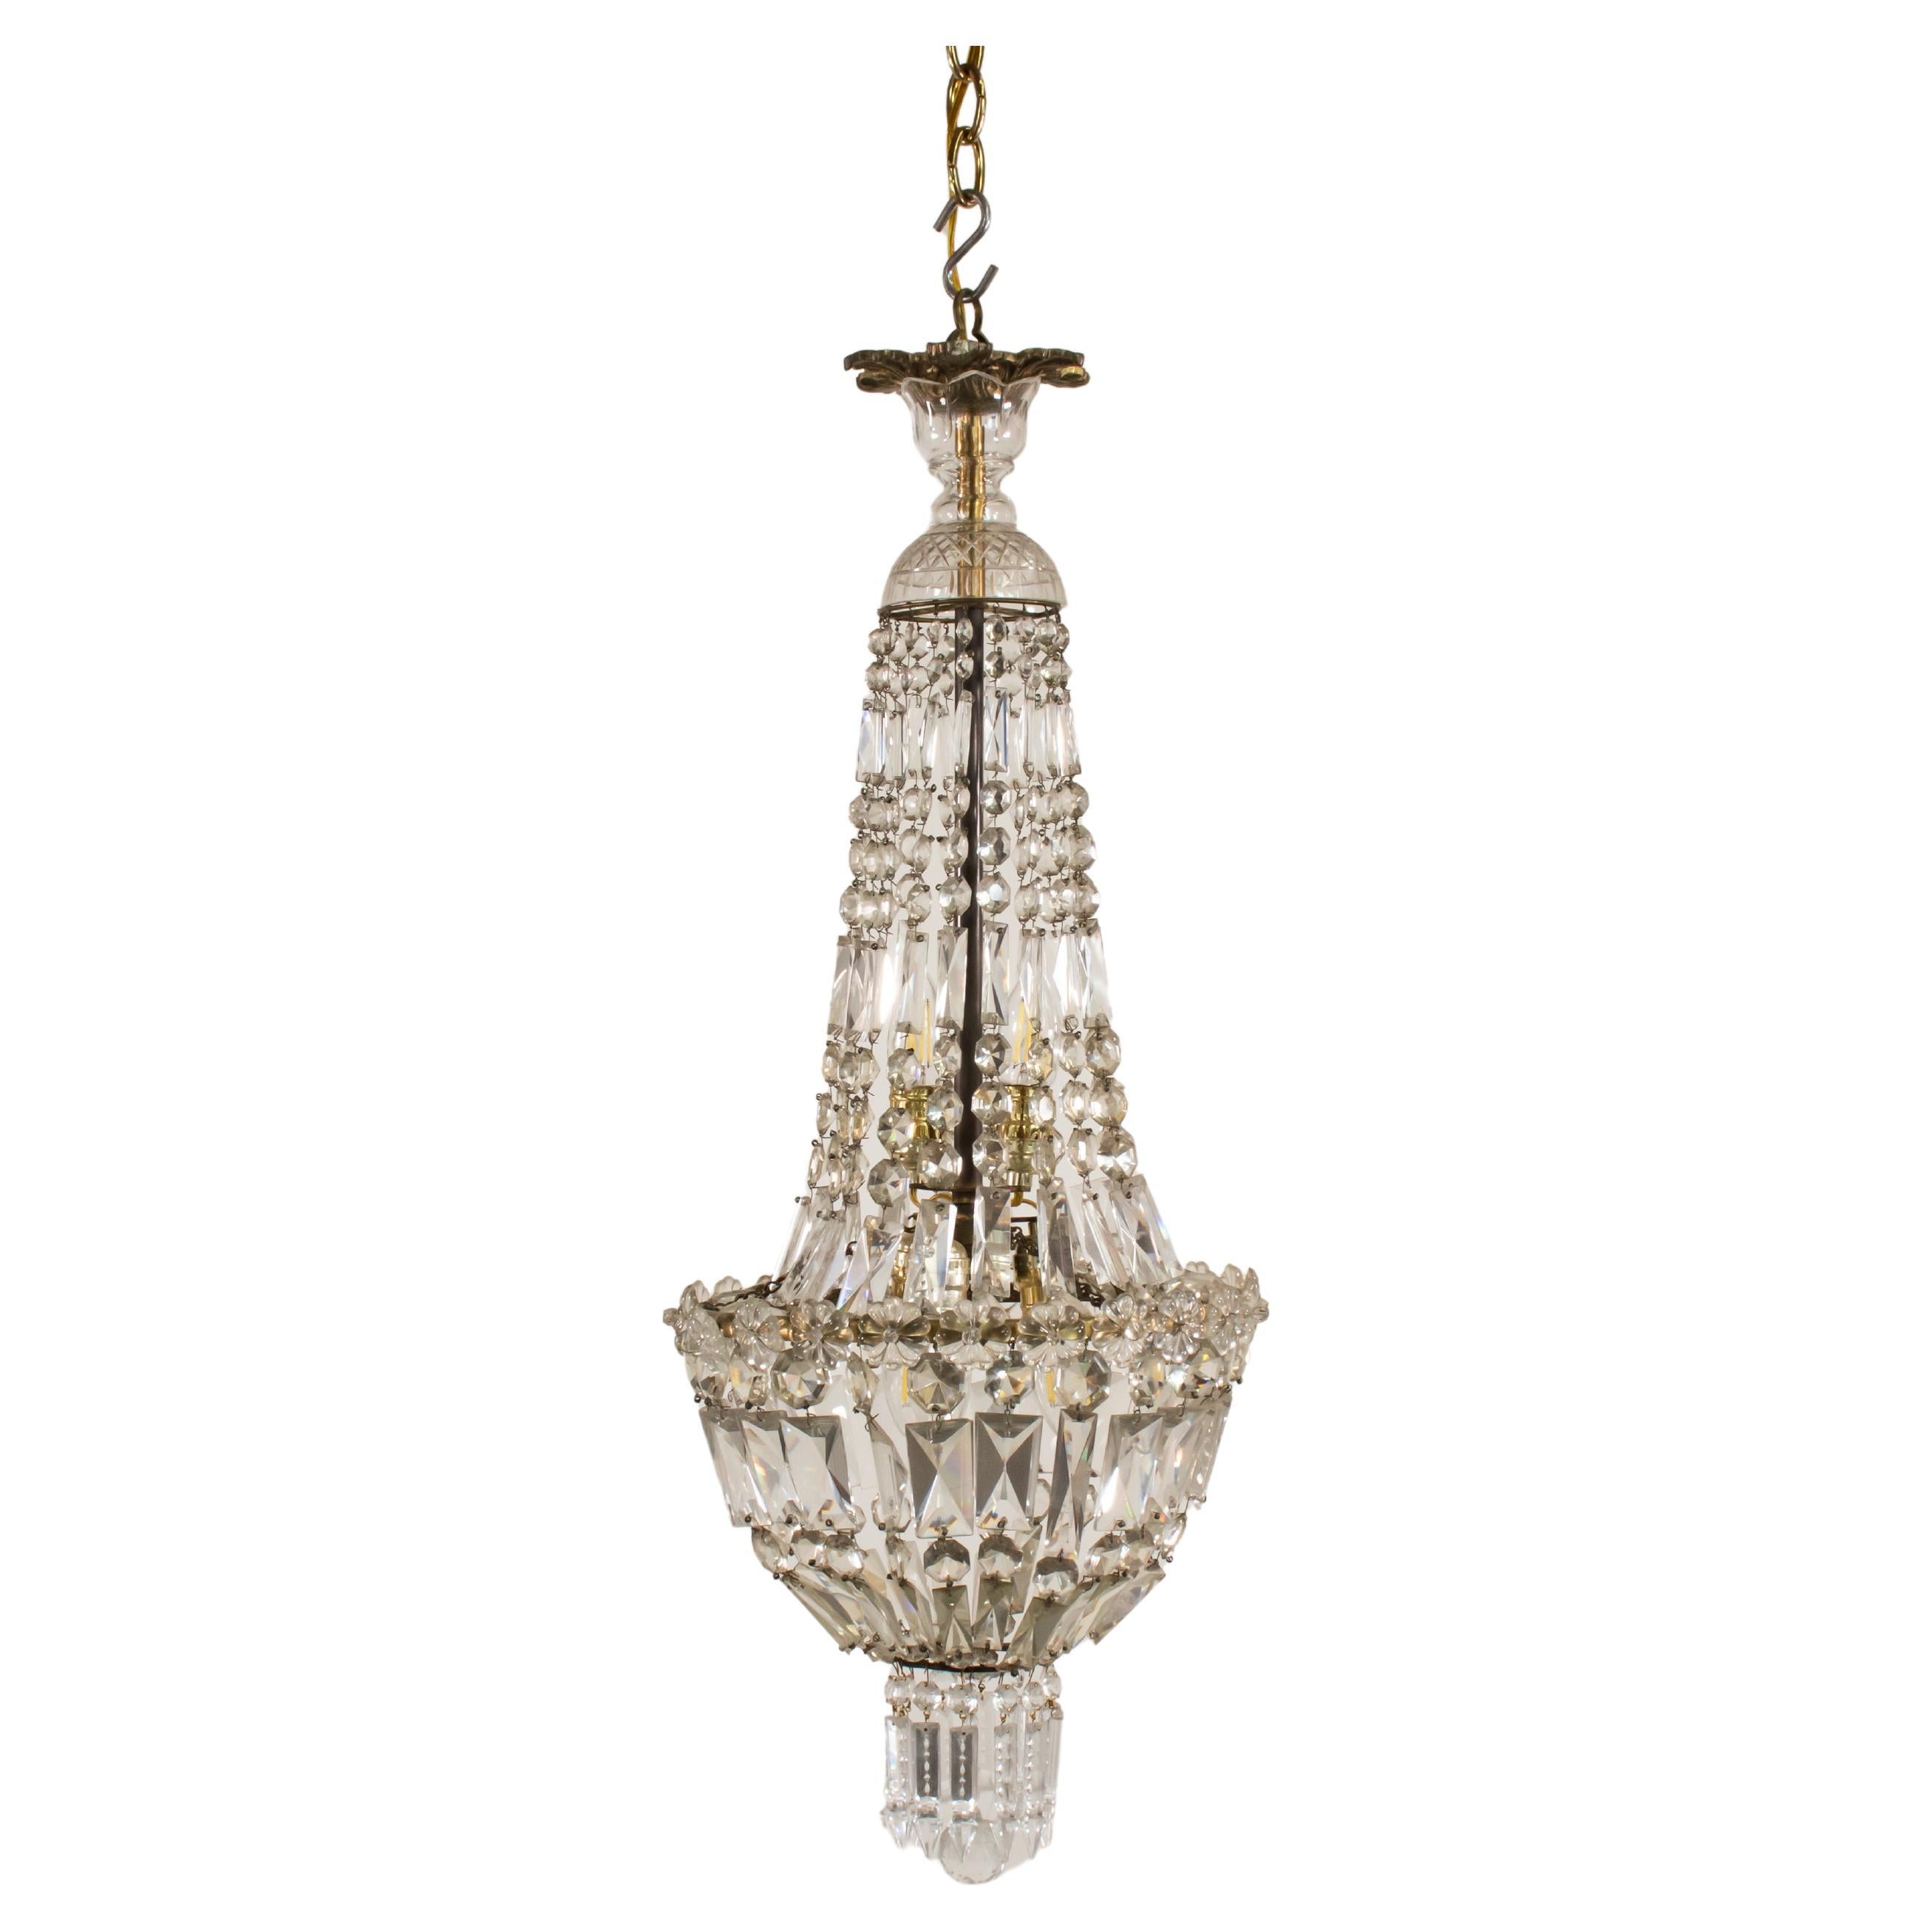 Early 20th Century French Empire Style Crystal Chandelier For Sale